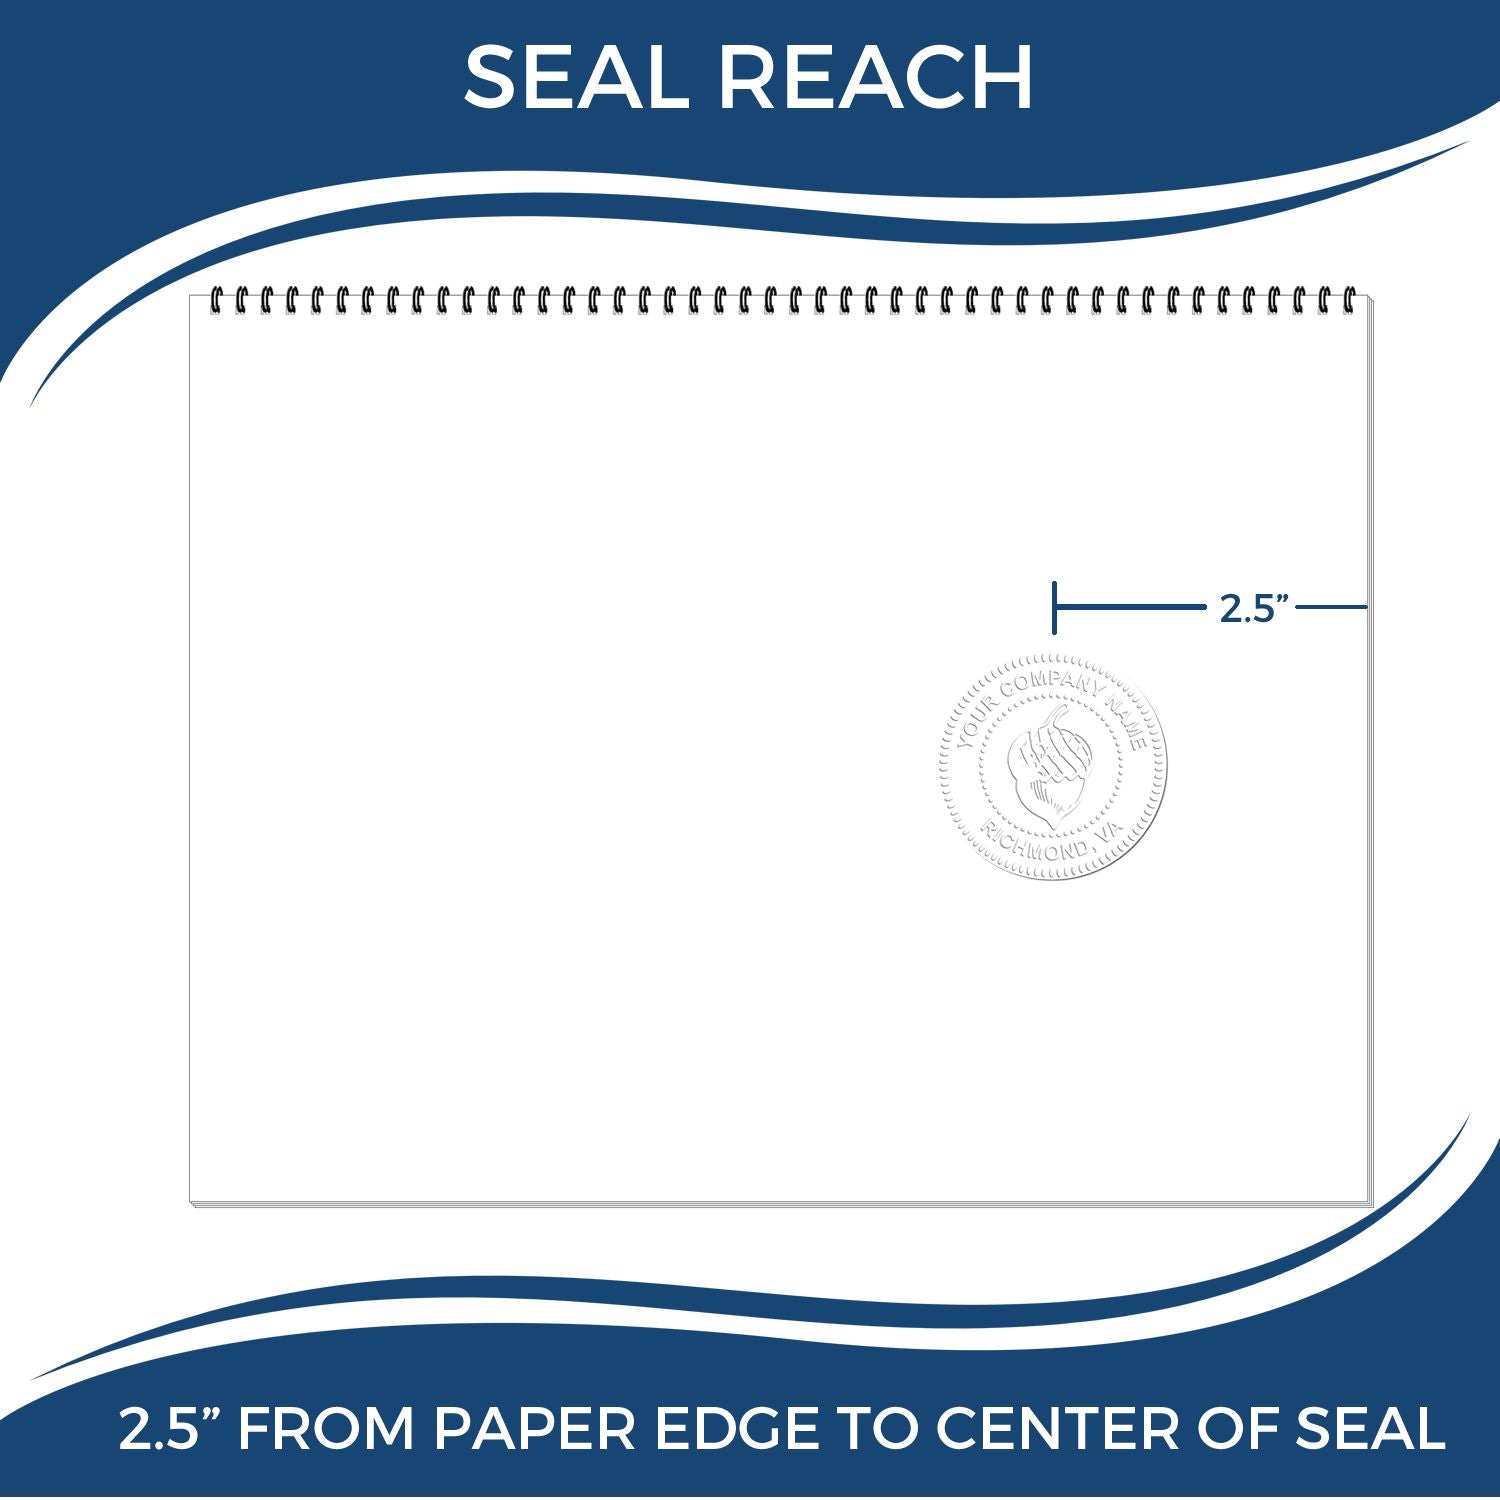 An infographic showing the seal reach which is represented by a ruler and a miniature seal image of the Kentucky Long Reach Landscape Architect Embossing Stamp